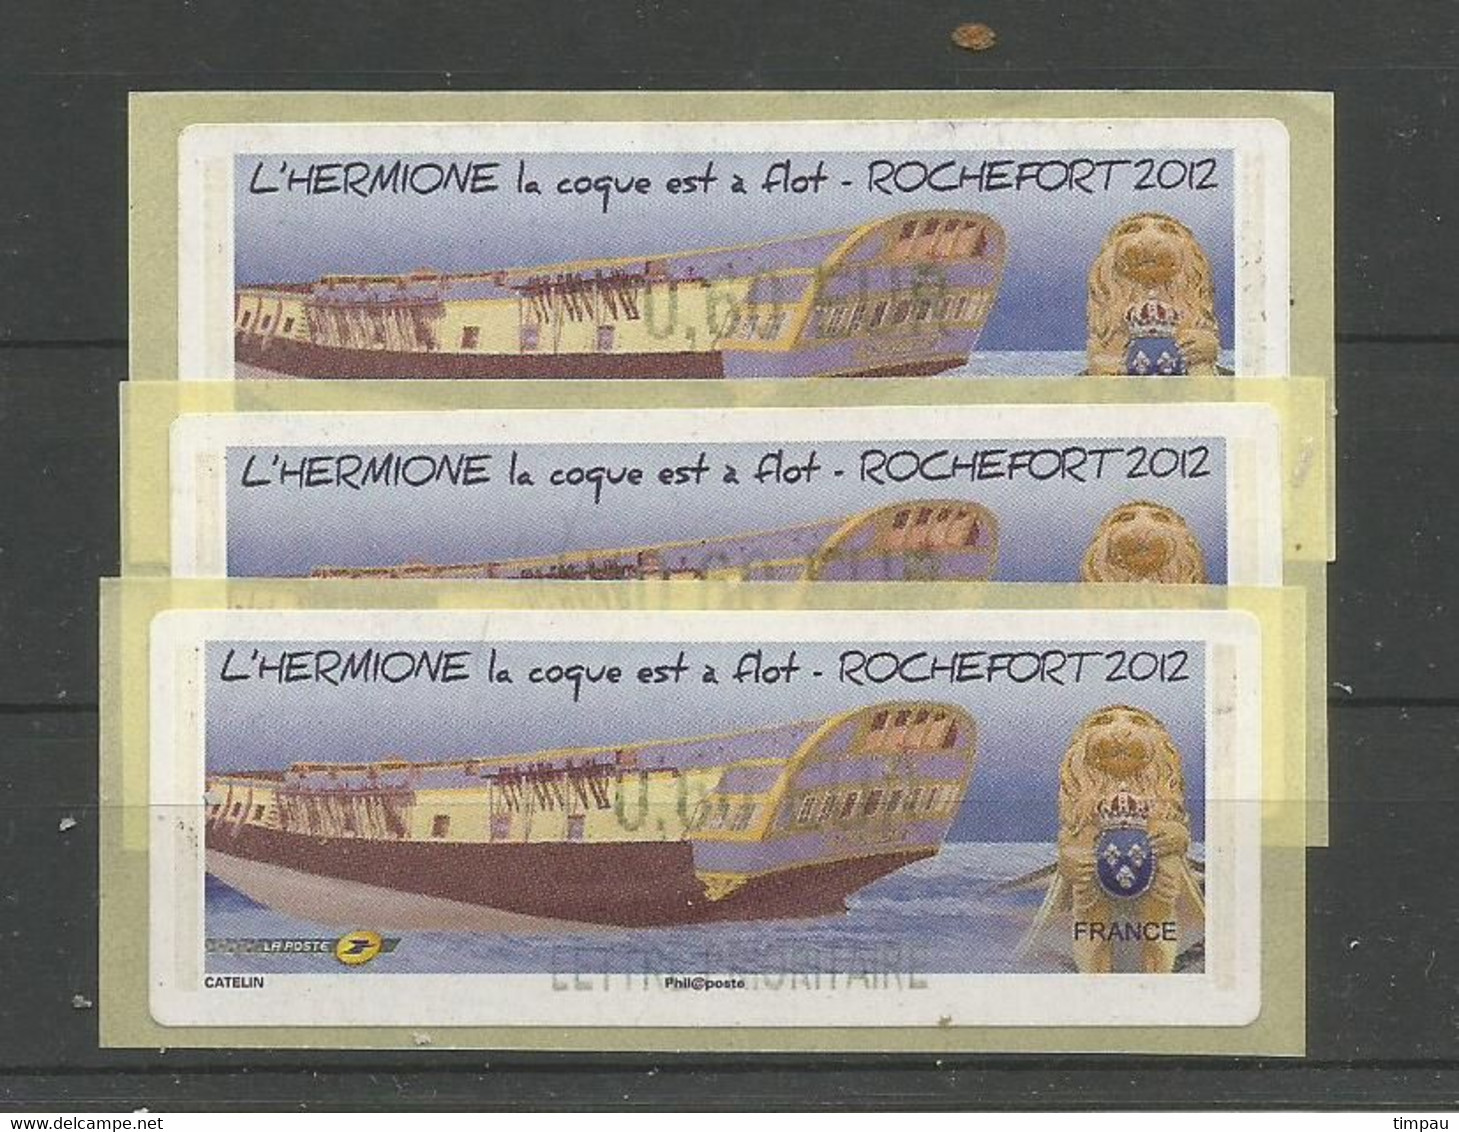 L'HERMIONE ROCHEFORT 2012 - 1999-2009 Illustrated Franking Labels